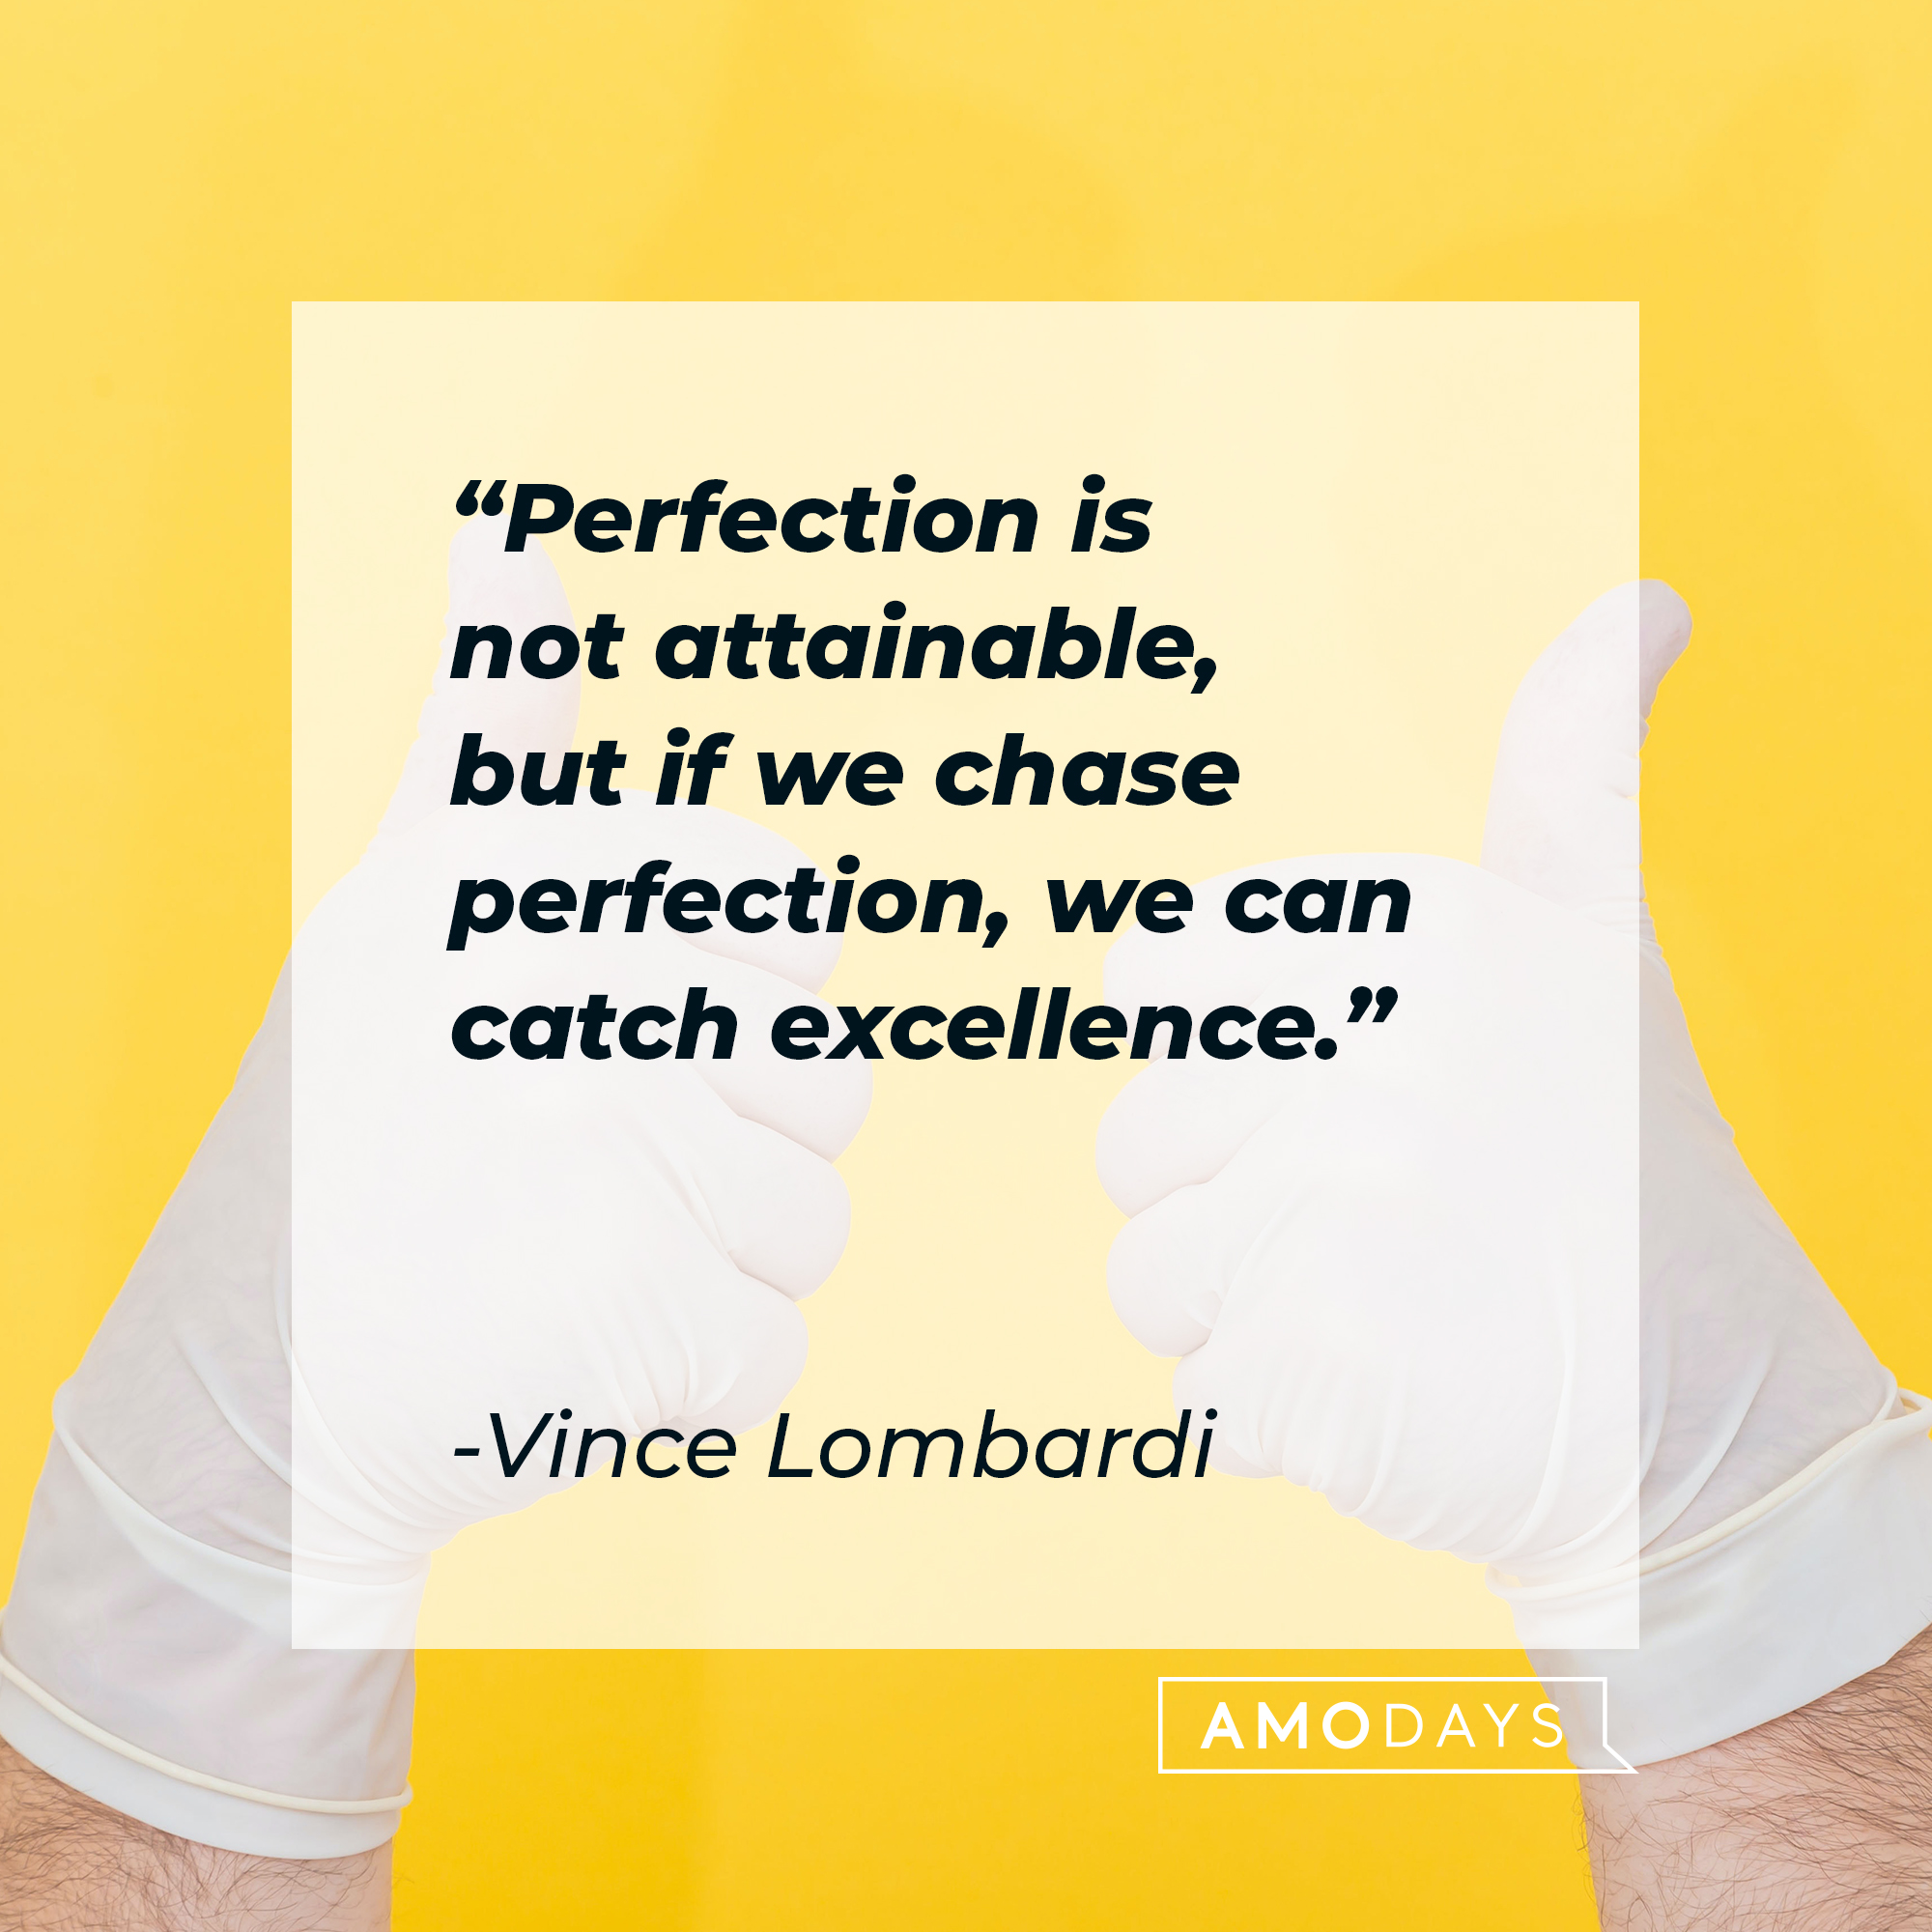 Vince Lombardi's quote: "Perfection is not attainable, but if we chase perfection, we can catch excellence." | Image: Unsplash